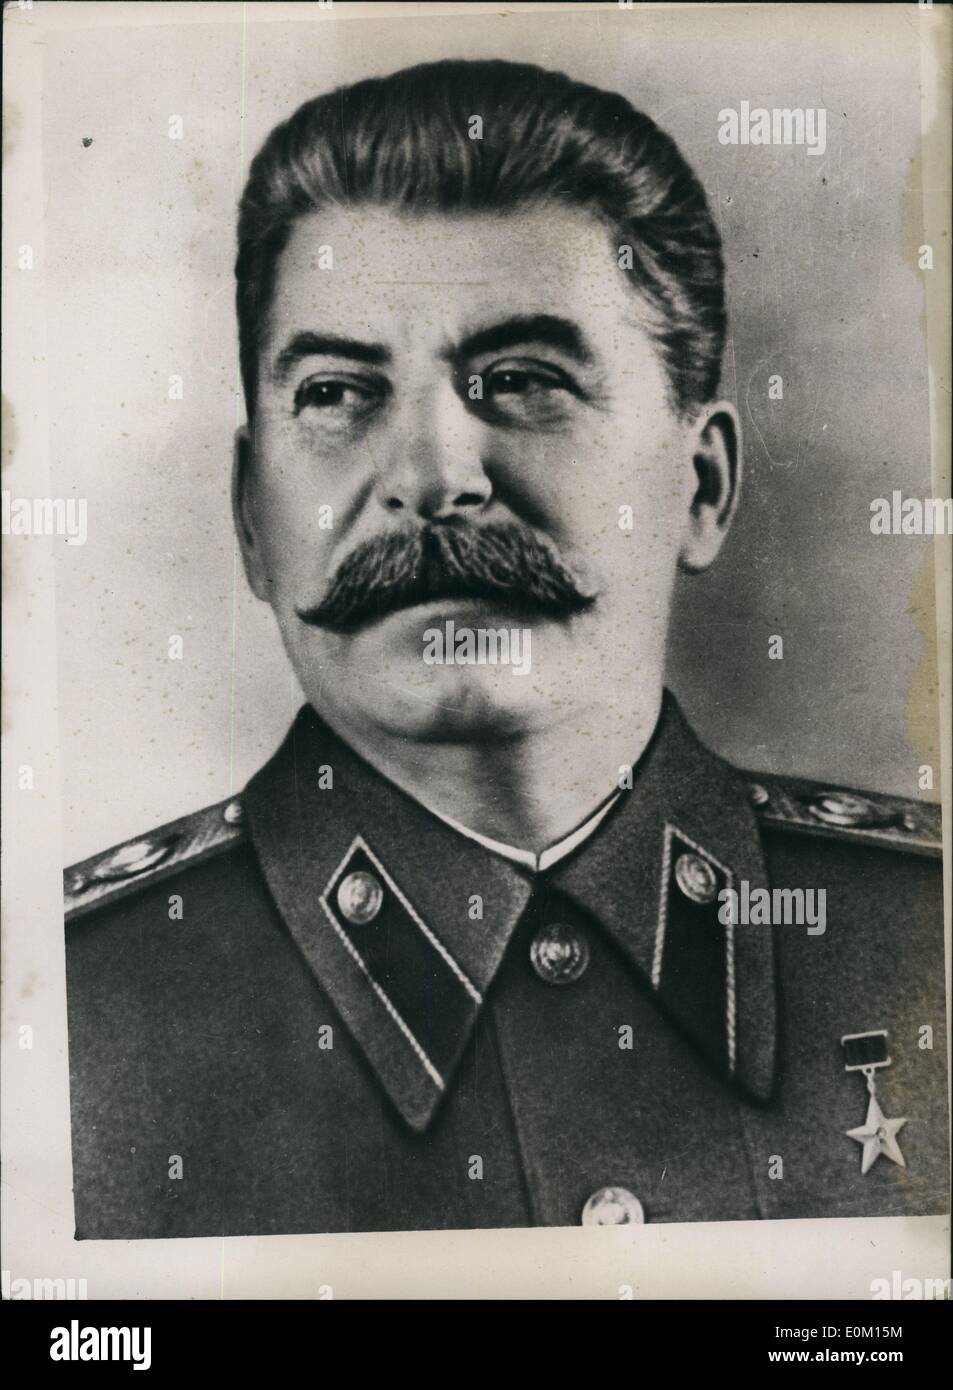 Mar. 03, 1953 - Marshal Stalin seriously ill at the Kremlin in Coma following stroke. Photo shows portrait Marshal Stalin who is reported to be in coma following a stroke at the Kremlin. Stock Photo